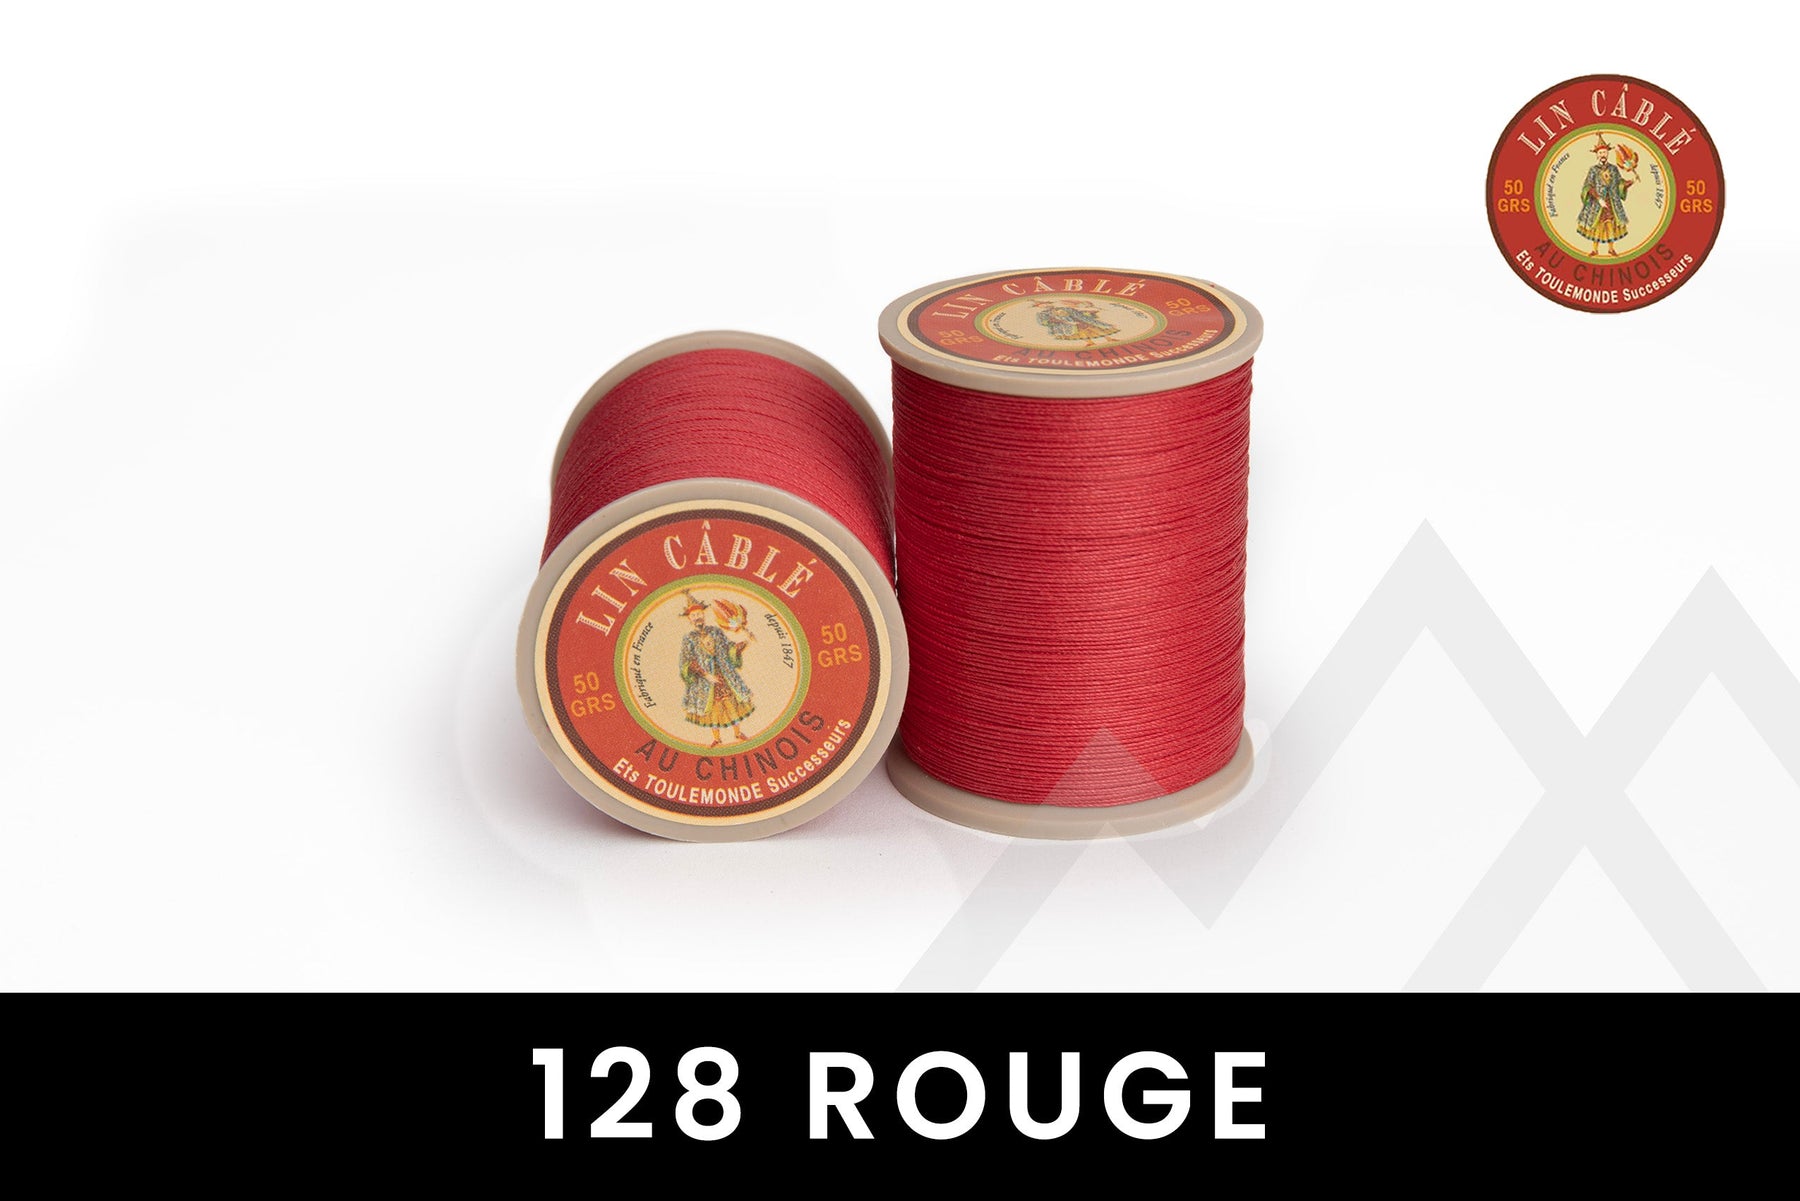 Fil au Chinois 🇫🇷 - "Lin Cable" Waxed Linen Thread (Size 632) *15 Meters